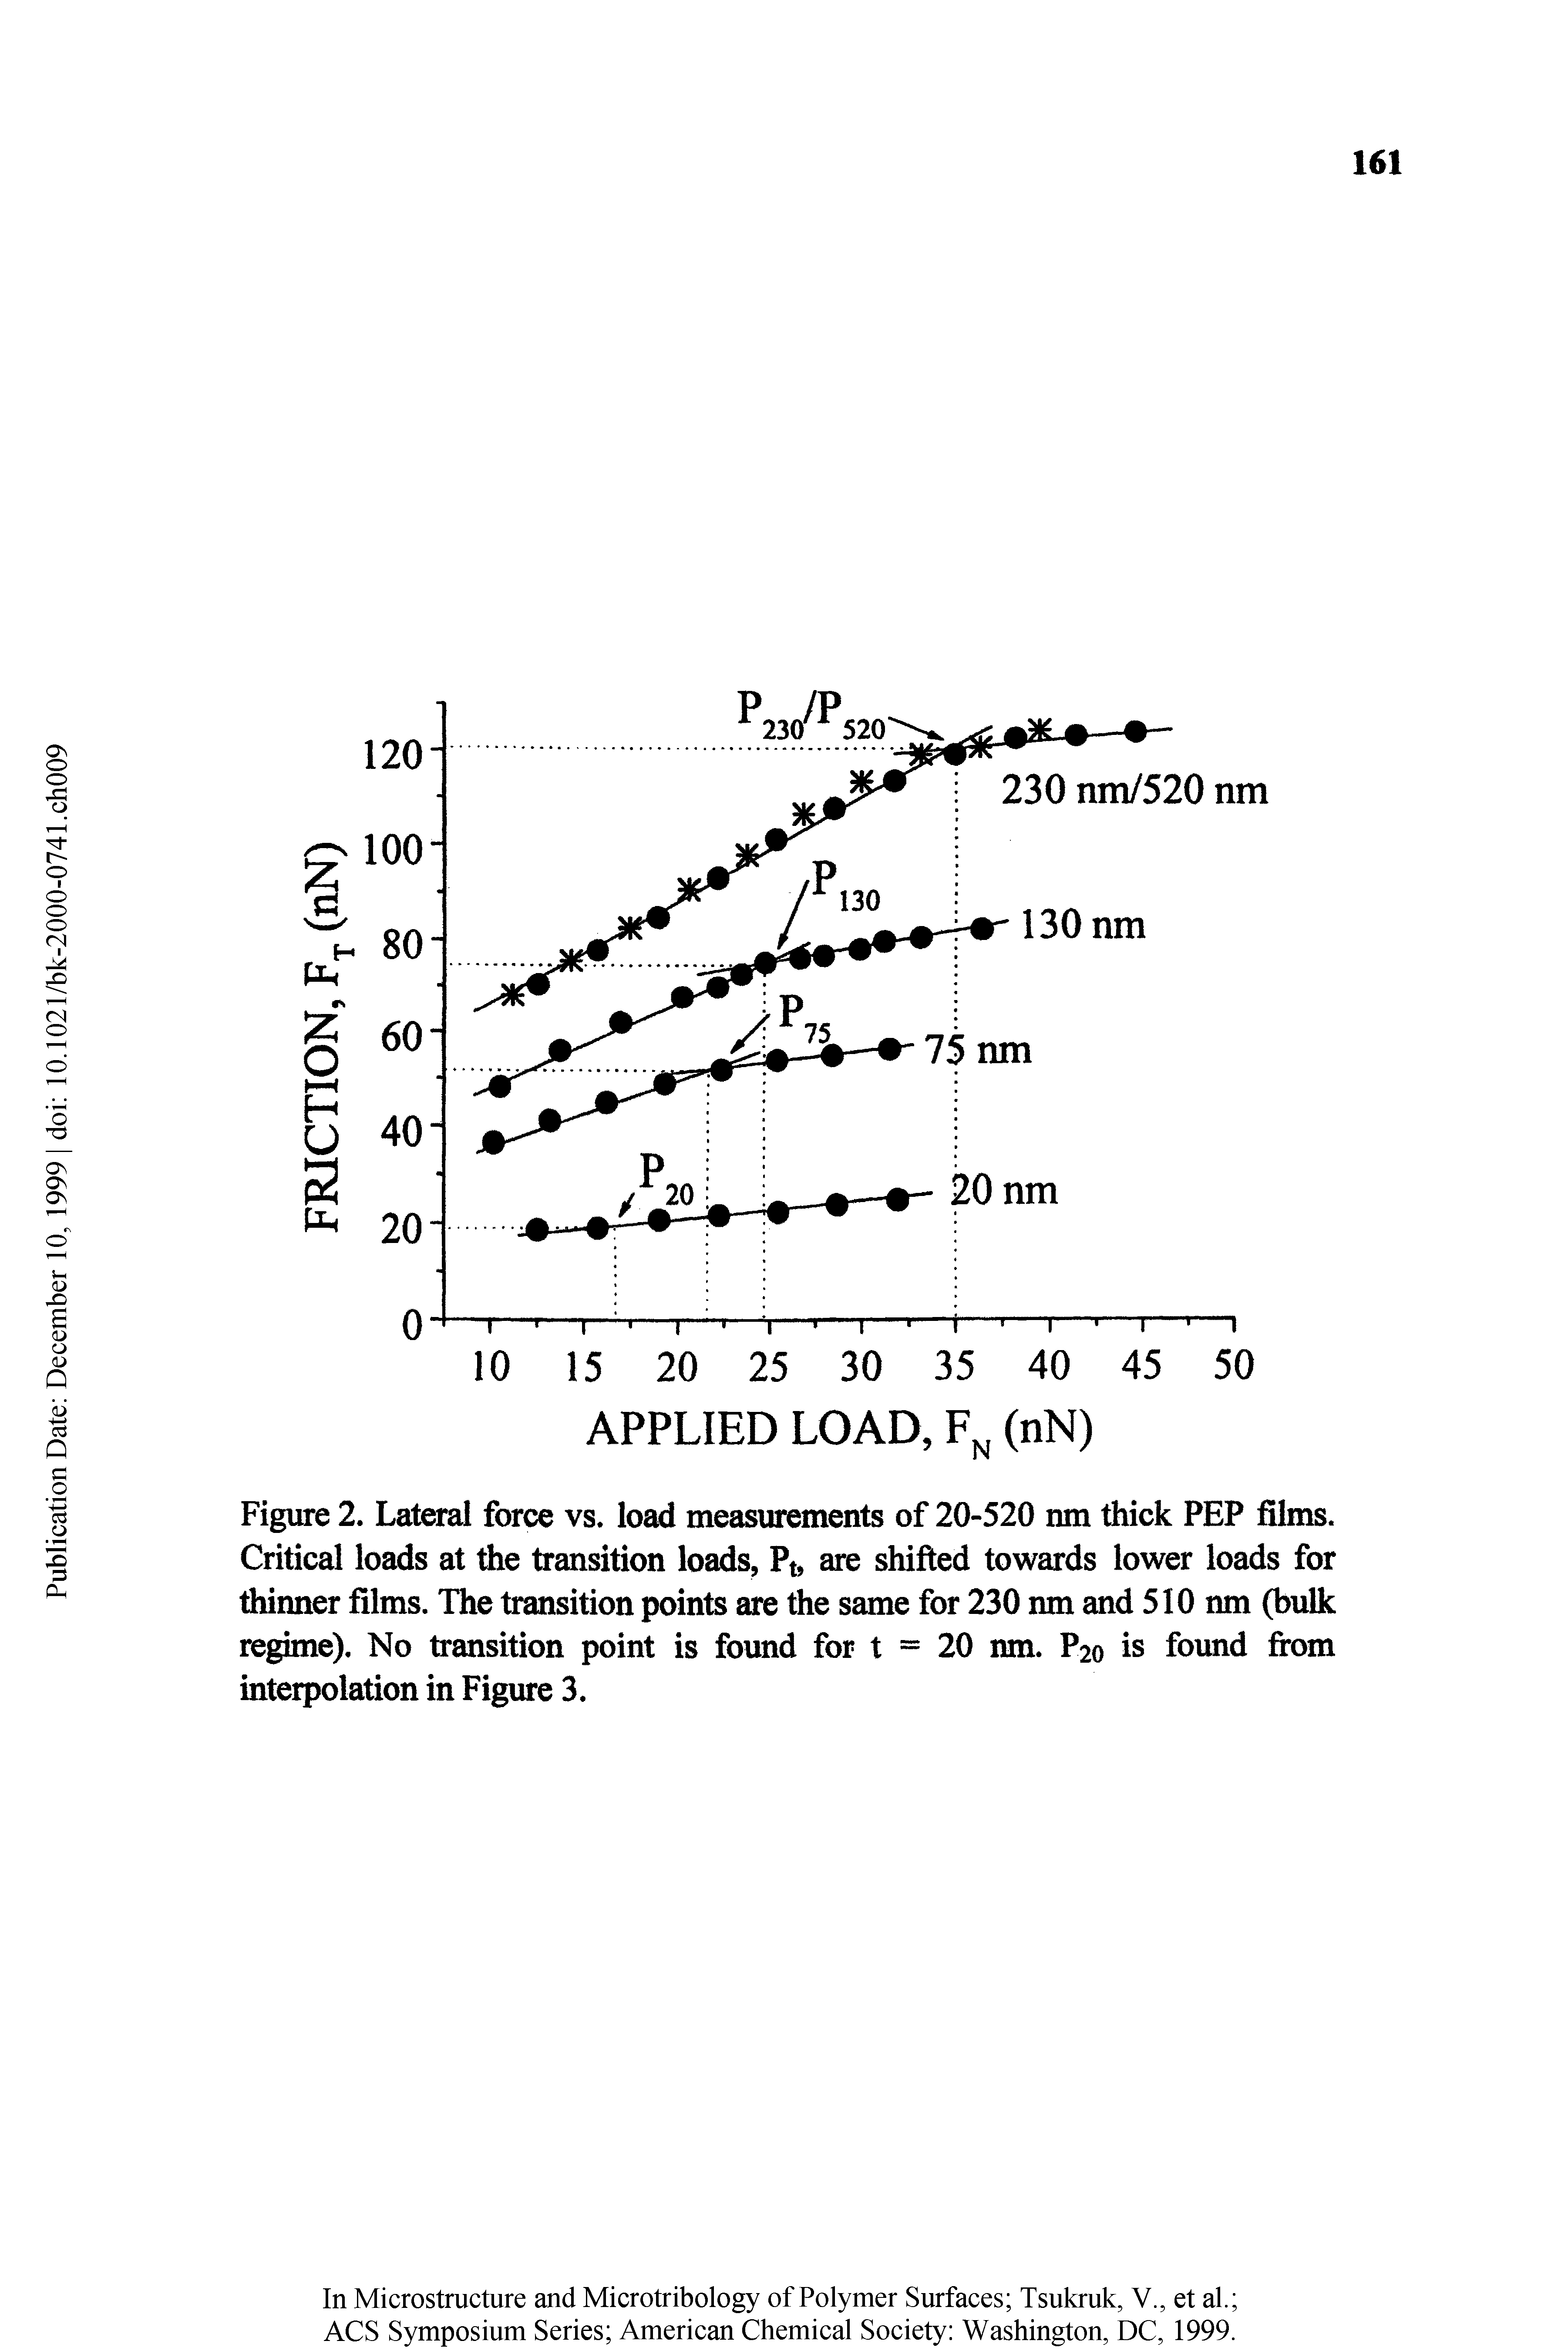 Figure 2. Lateral force vs. load measurements of 20-520 nm thick PEP films. Critical loads at file transition loads, Pt, are shifted towards lower loads for thinner films. The transition points are the same for 230 nm and 510 nm (bulk regime). No transition point is found for t = 20 nm. P20 is foimd from interpolation in Figure 3.